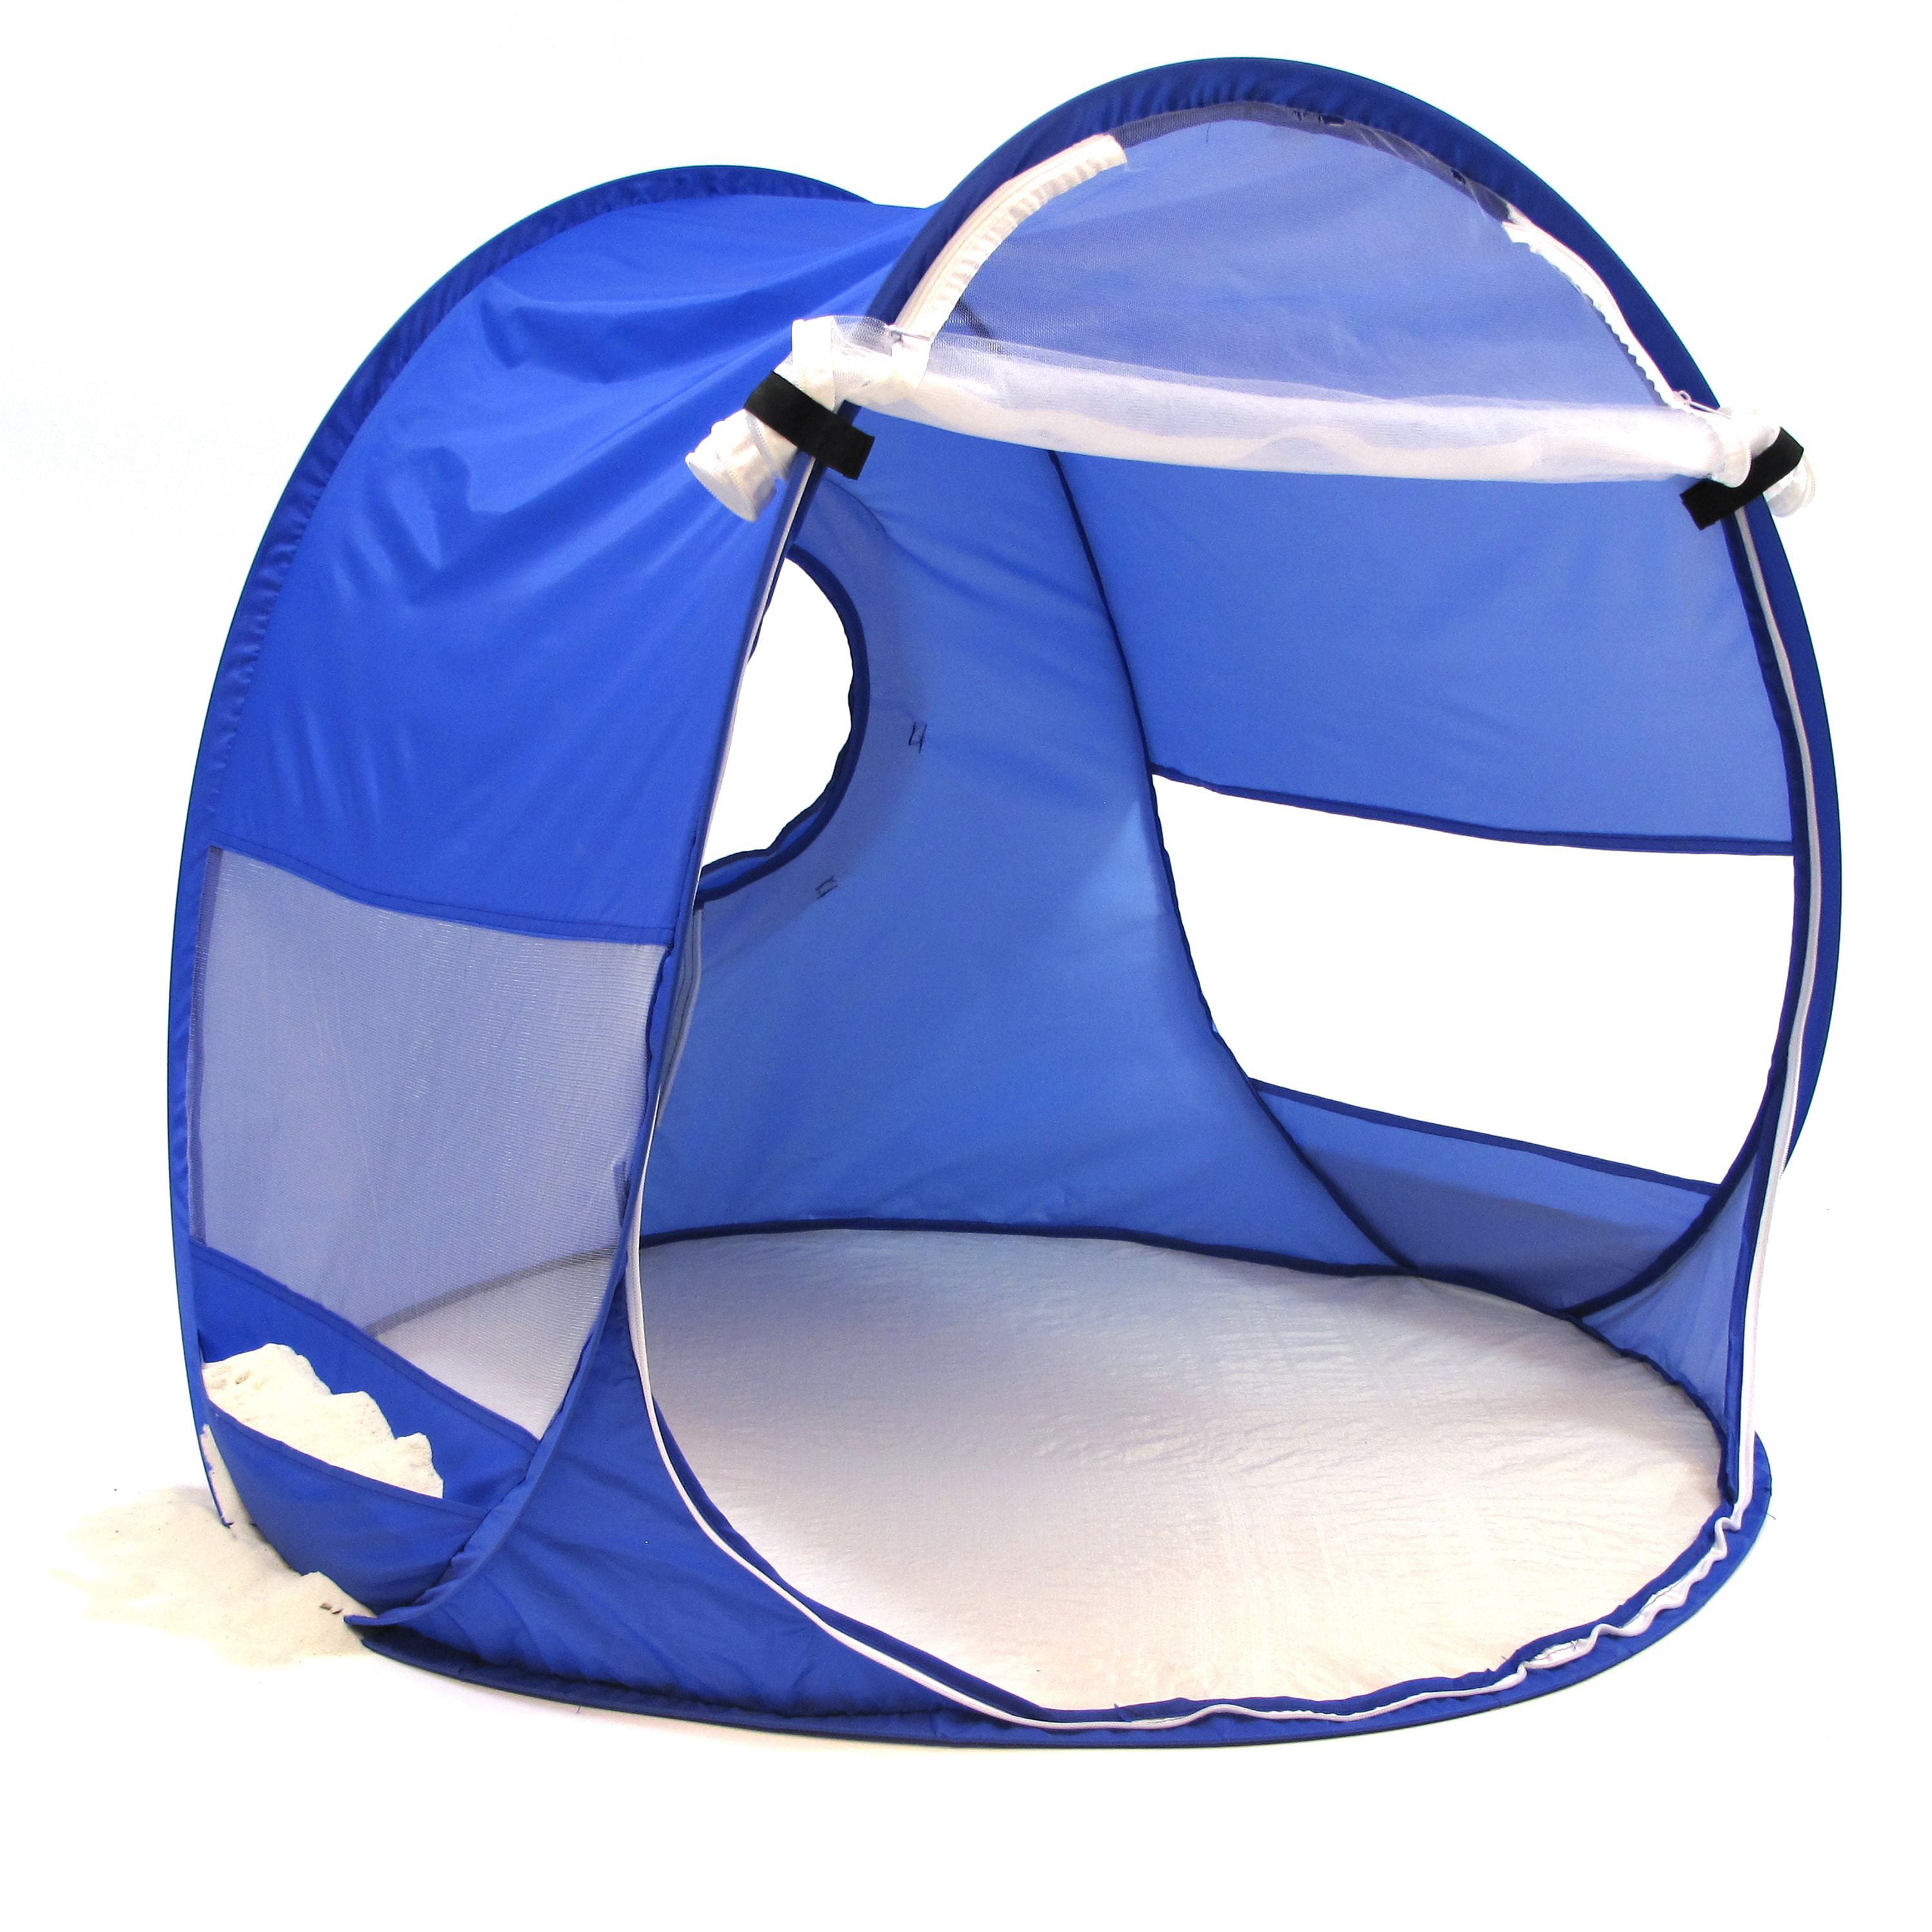 Super Multi Redmon For Kids Beach Baby Family Size Shade Dome 